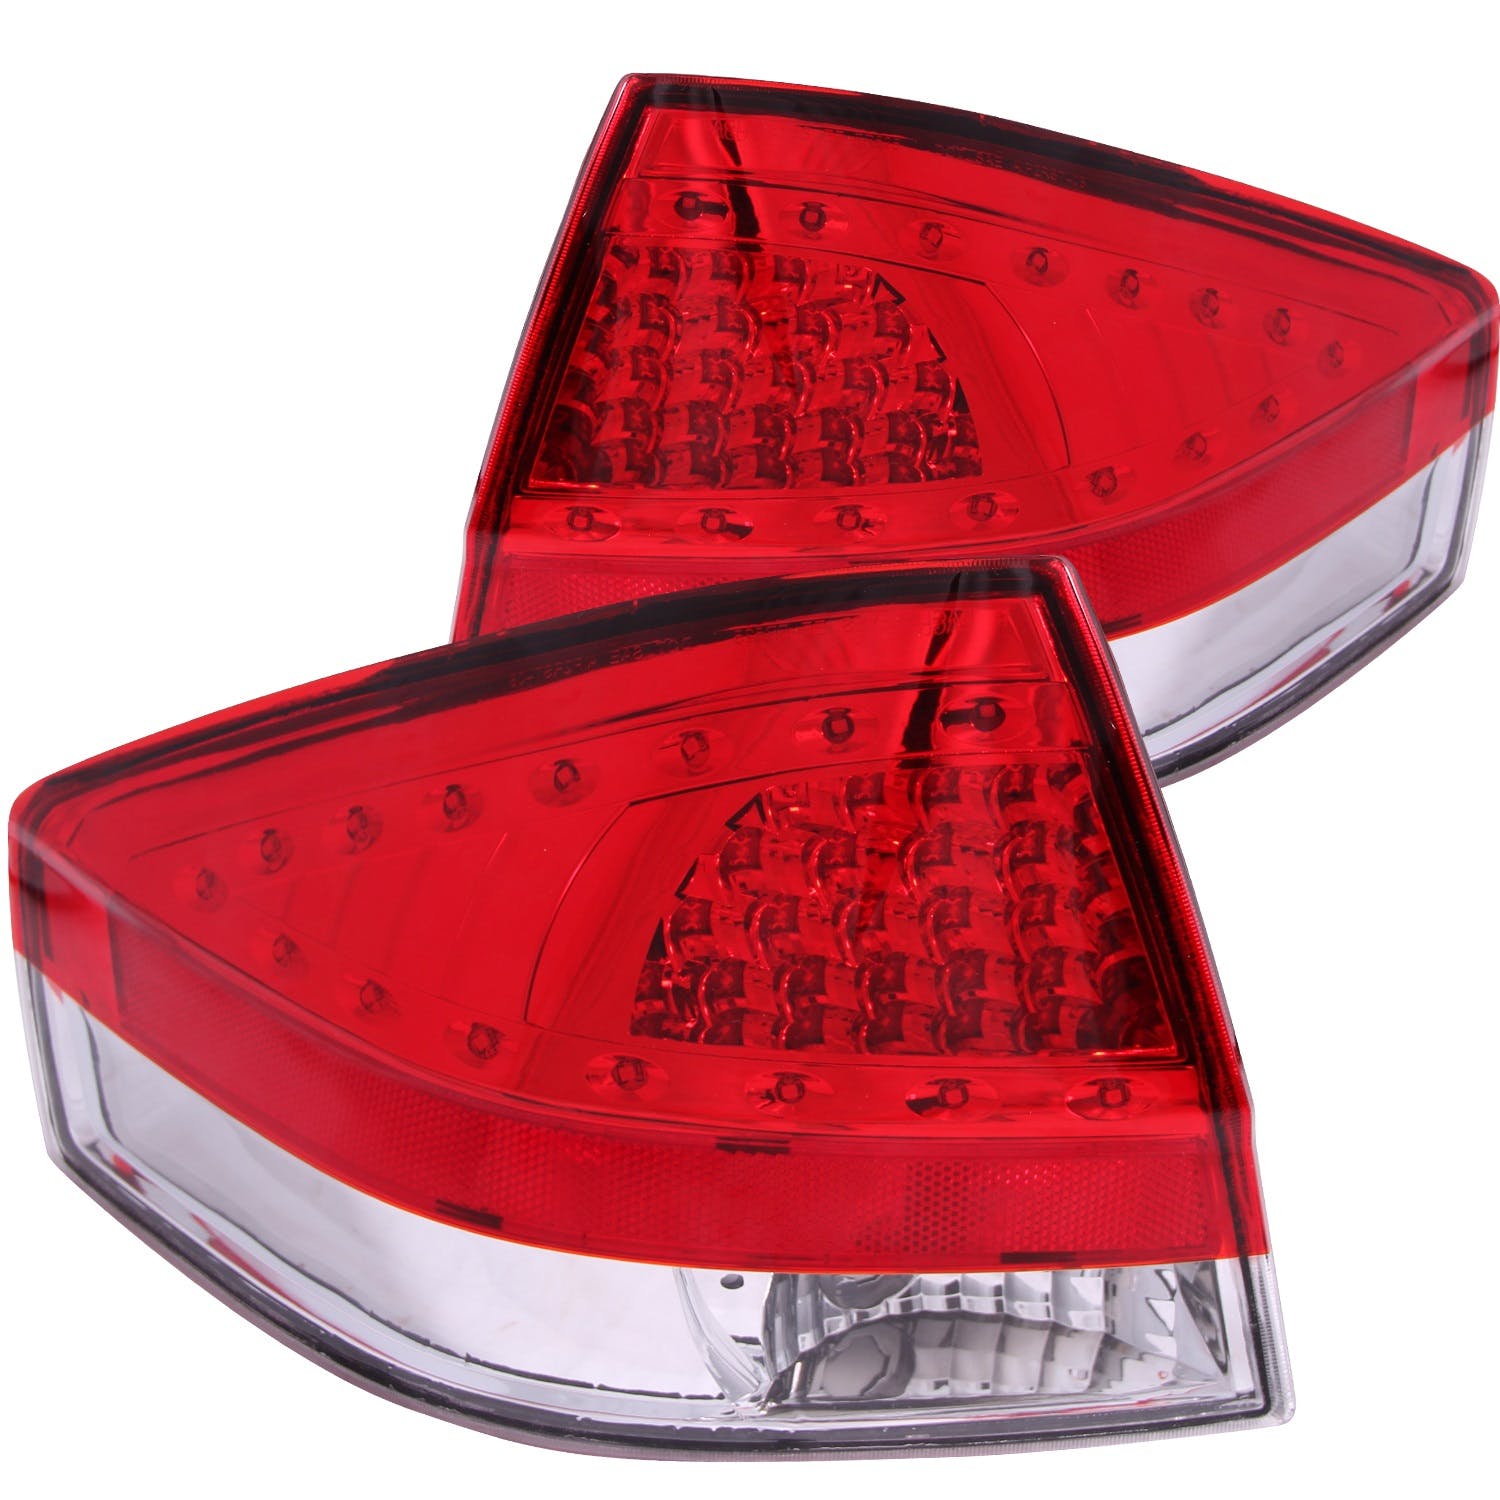 AnzoUSA 321197 LED Taillights Red/Clear